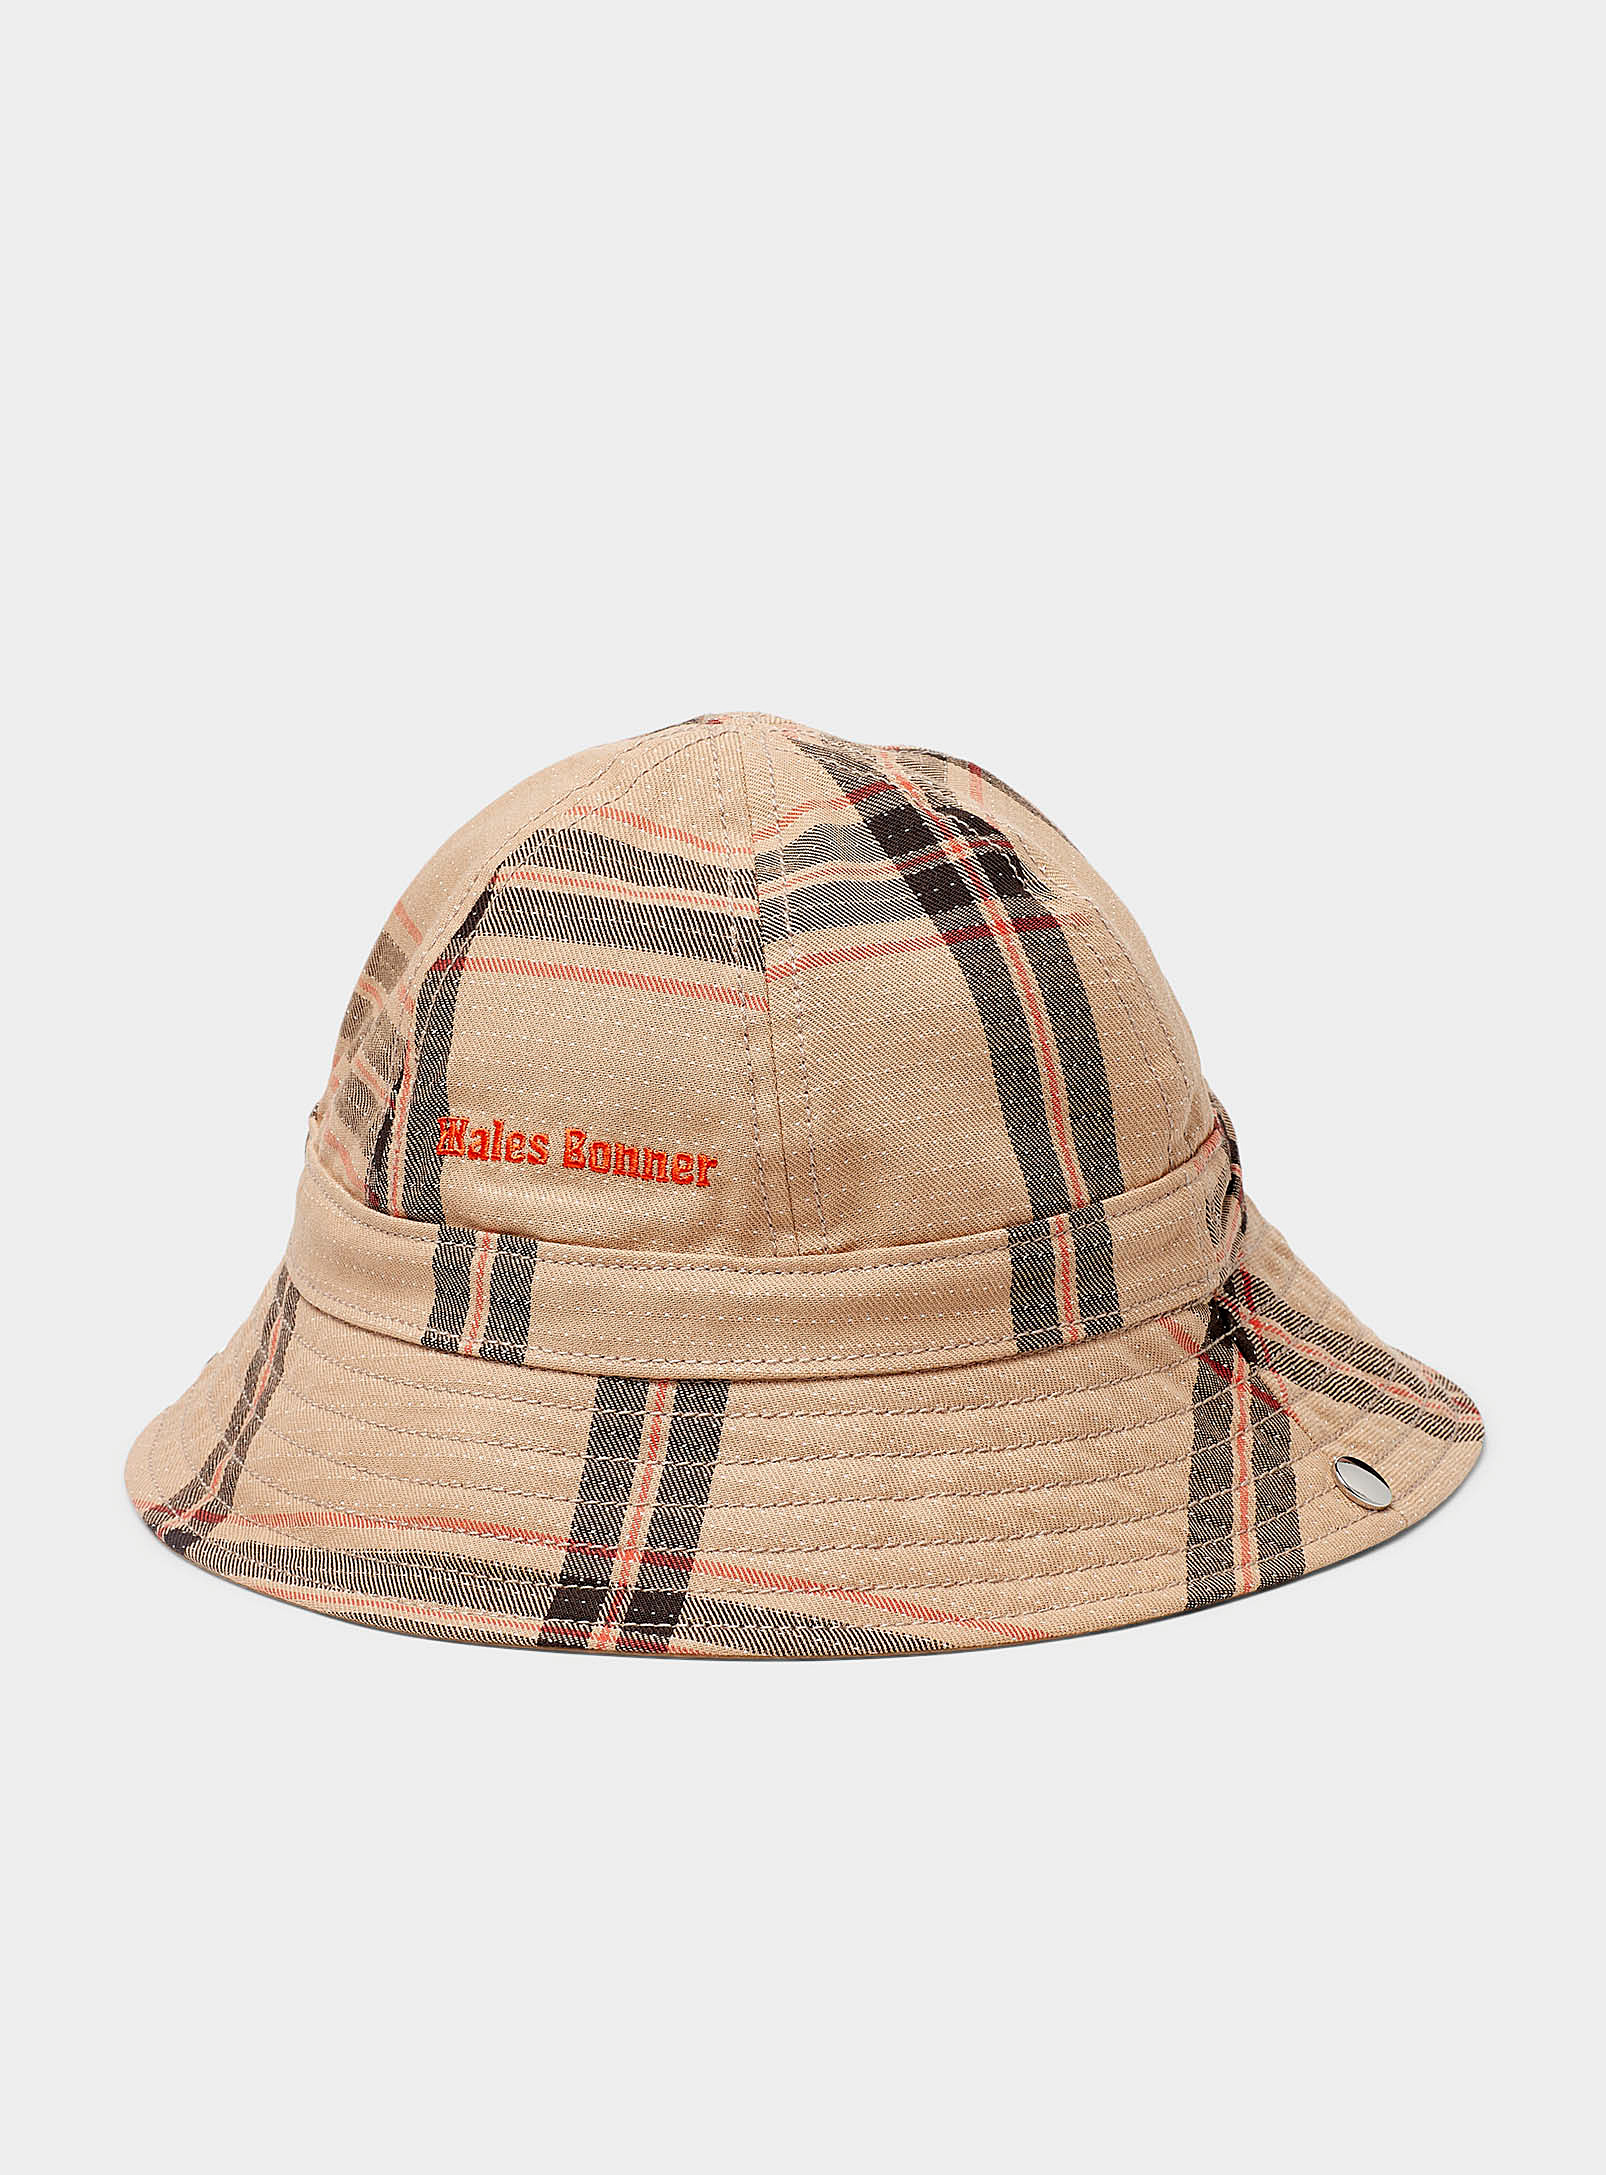 Adidas X Wales Bonner Checkered Reversible Bucket Hat In Neutral